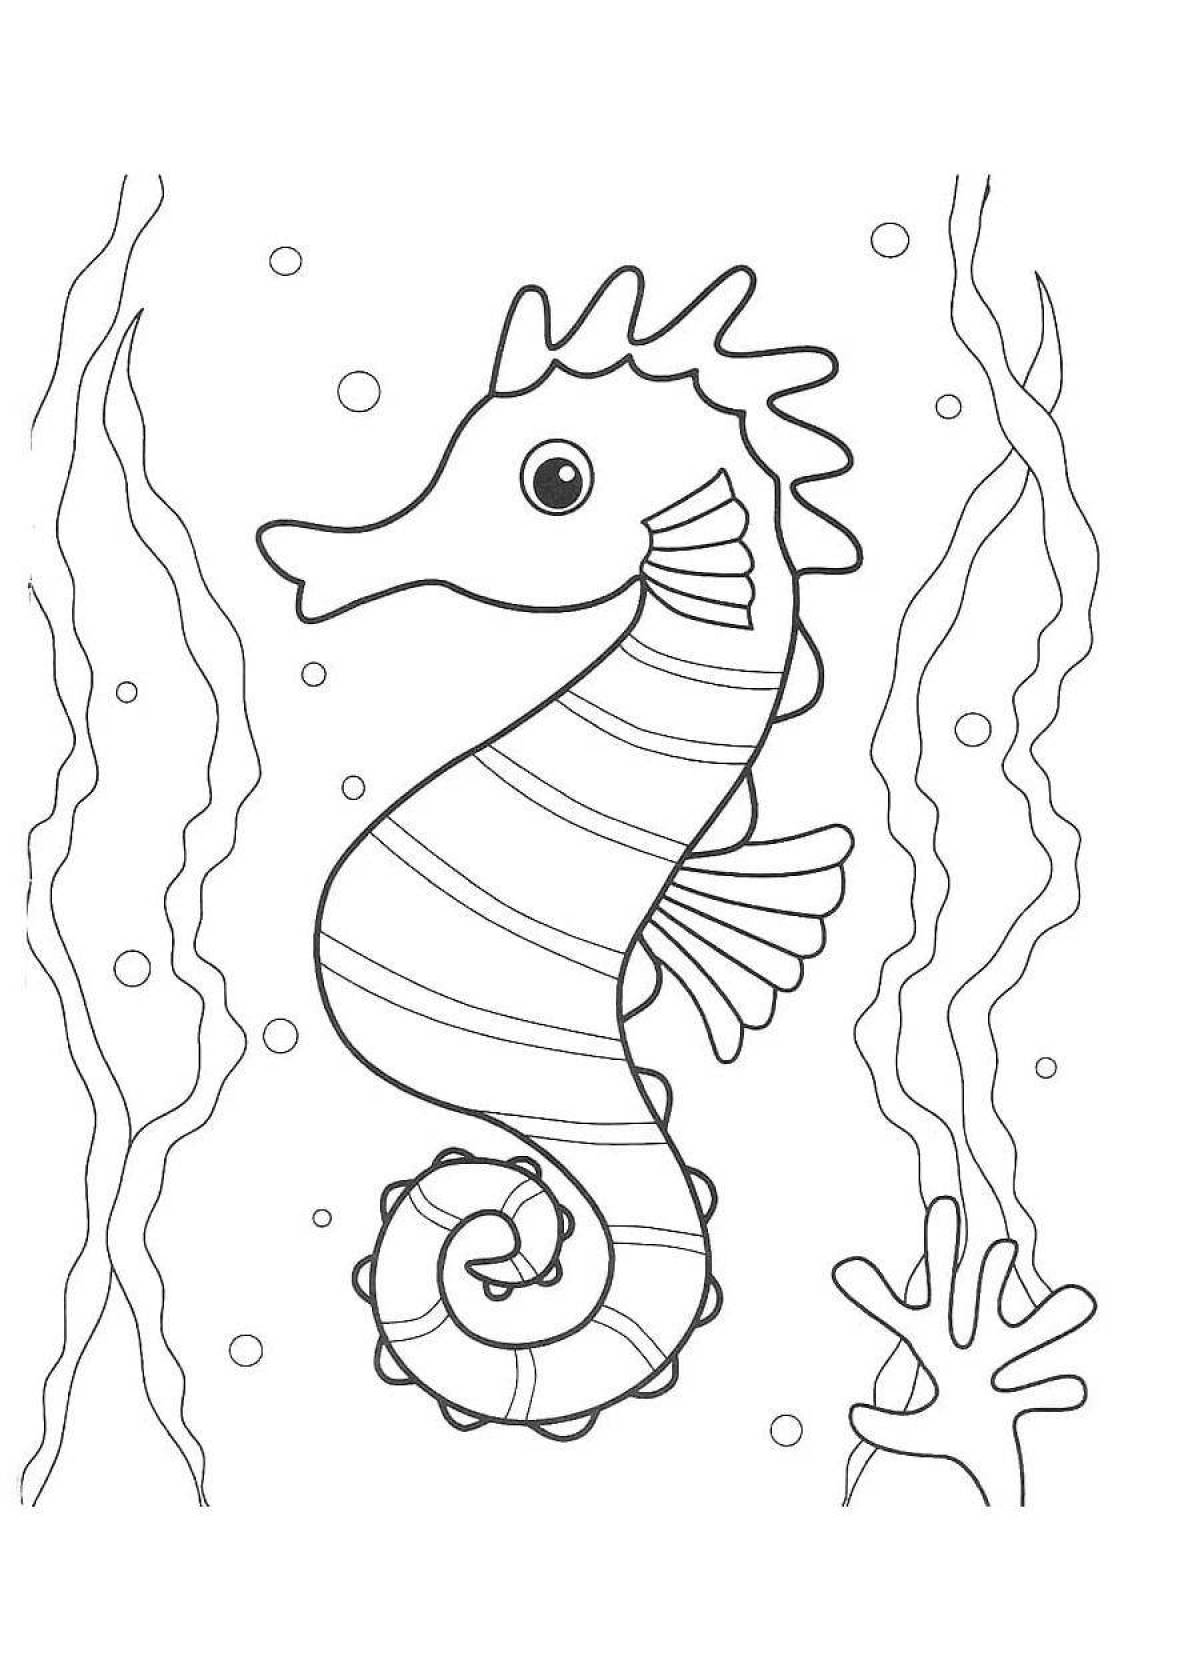 Fun coral reef coloring book for kids